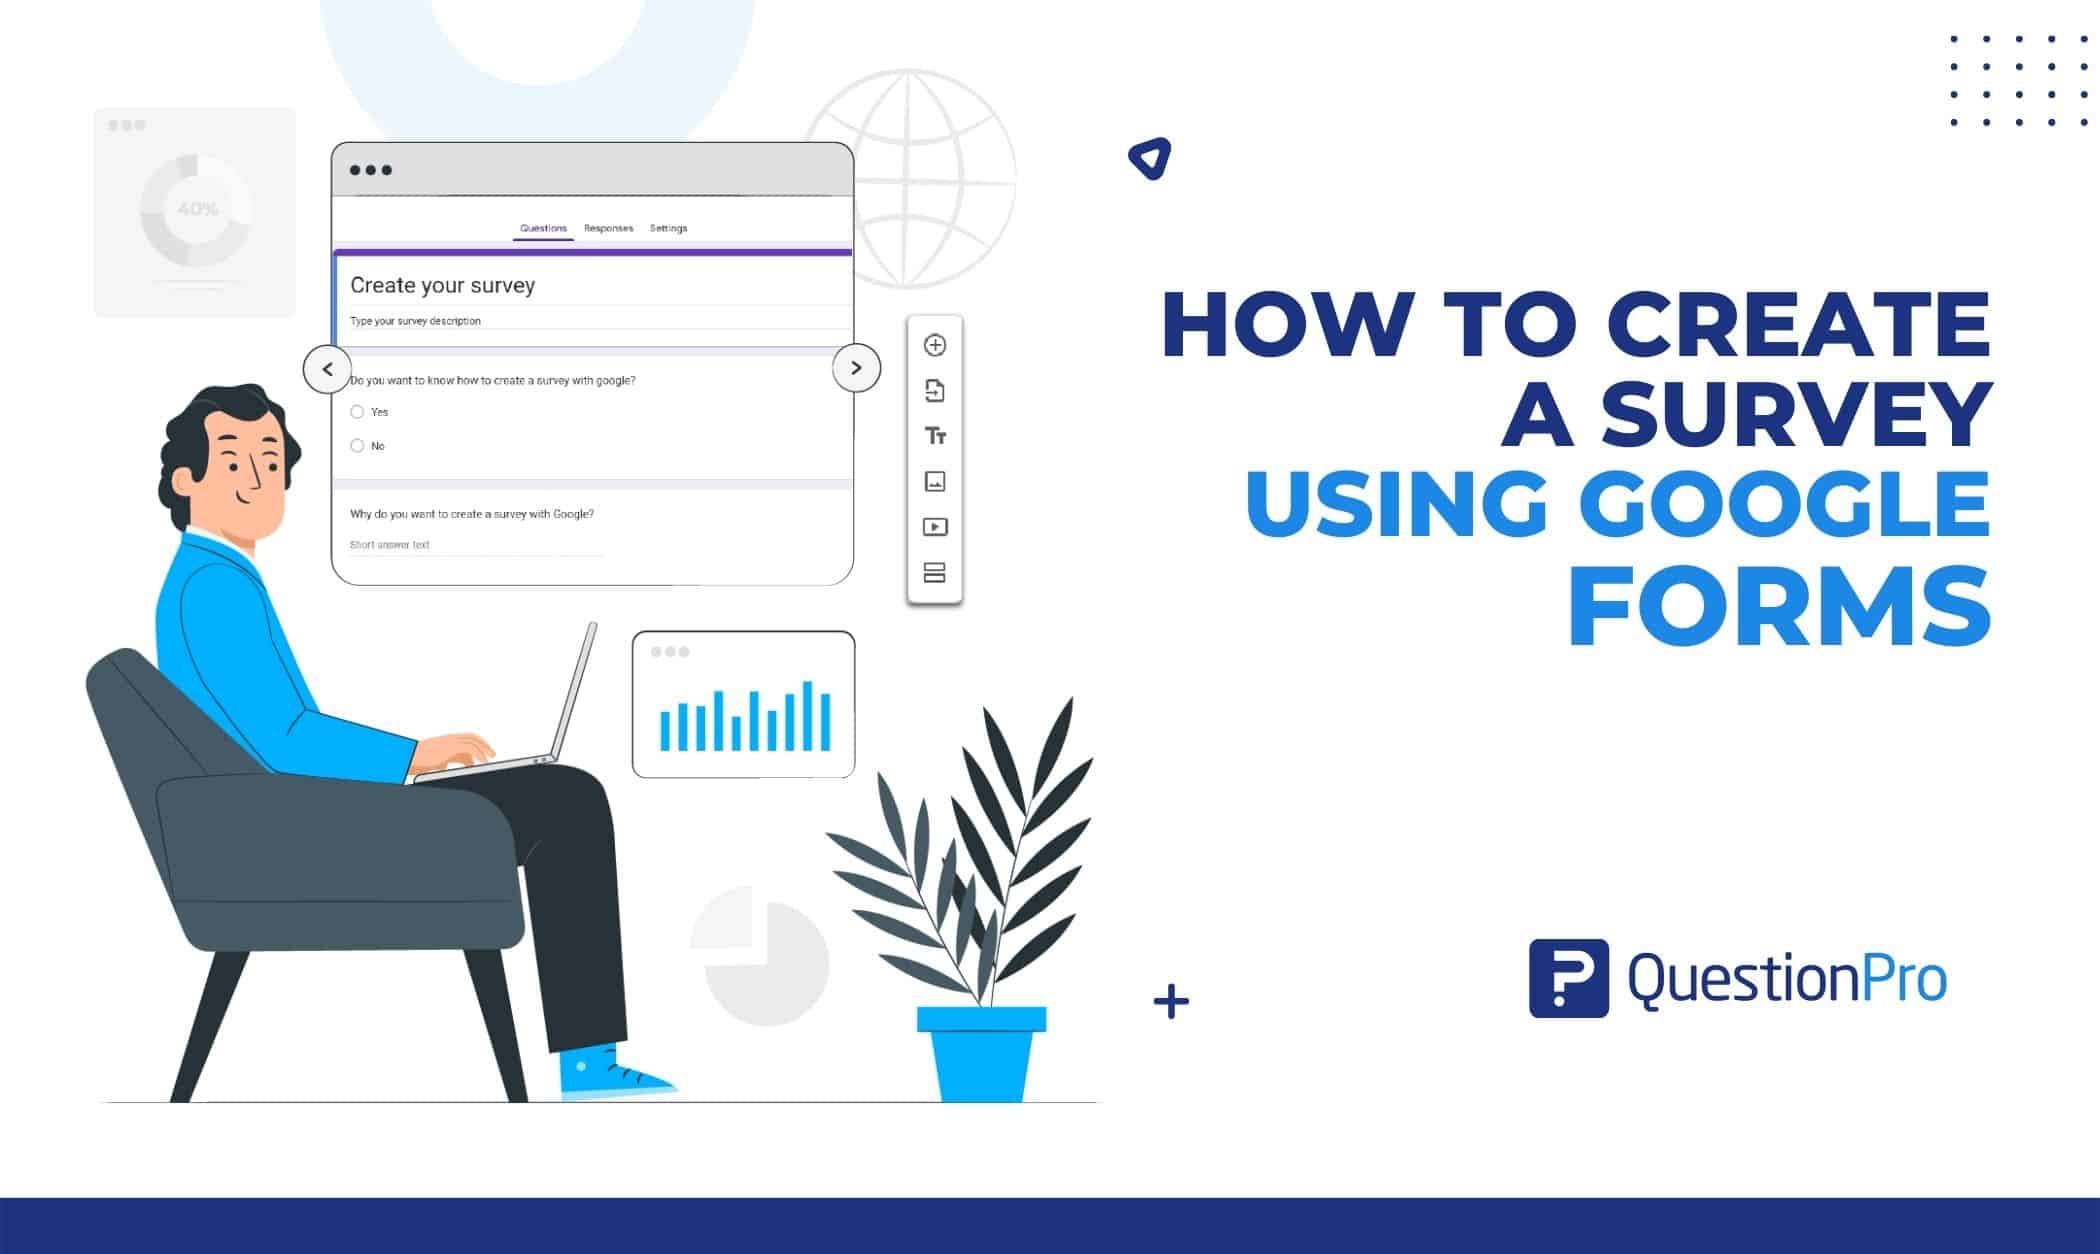 How to create a survey using Google Forms | QuestionPro